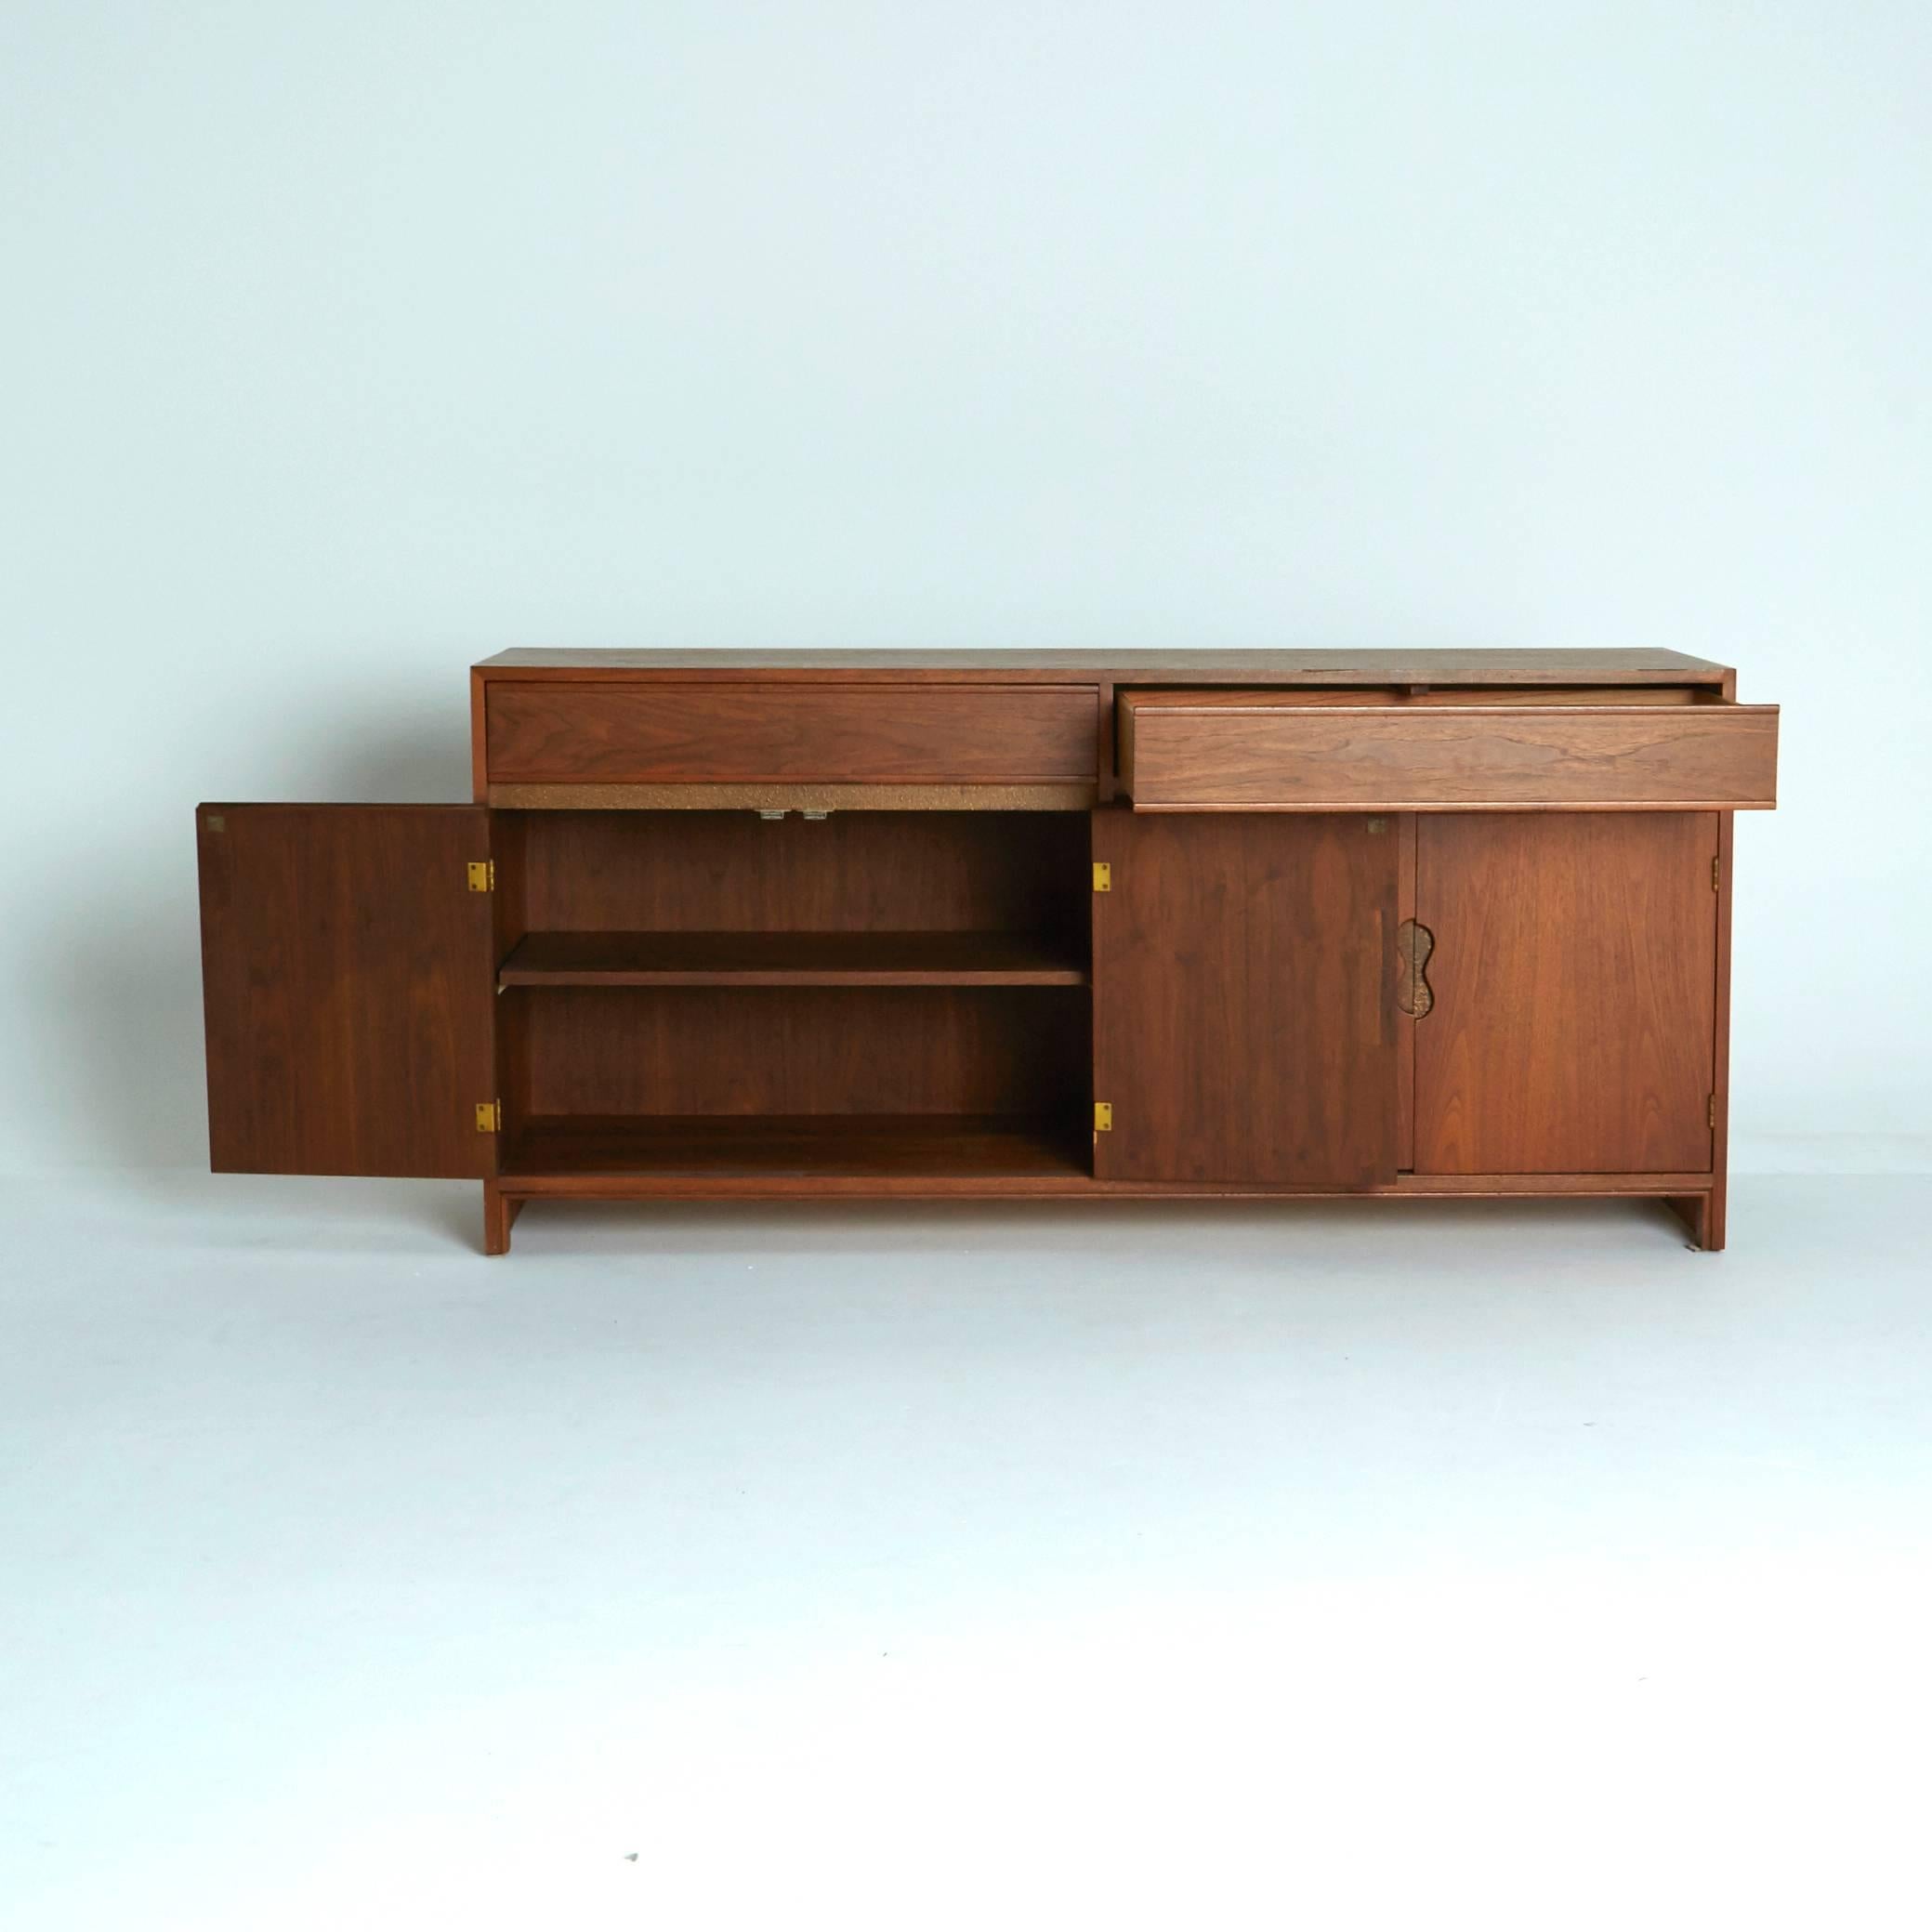 American Walnut Credenza by Paul Laszlo for Brown Saltman, Rare, Marked - ON SALE